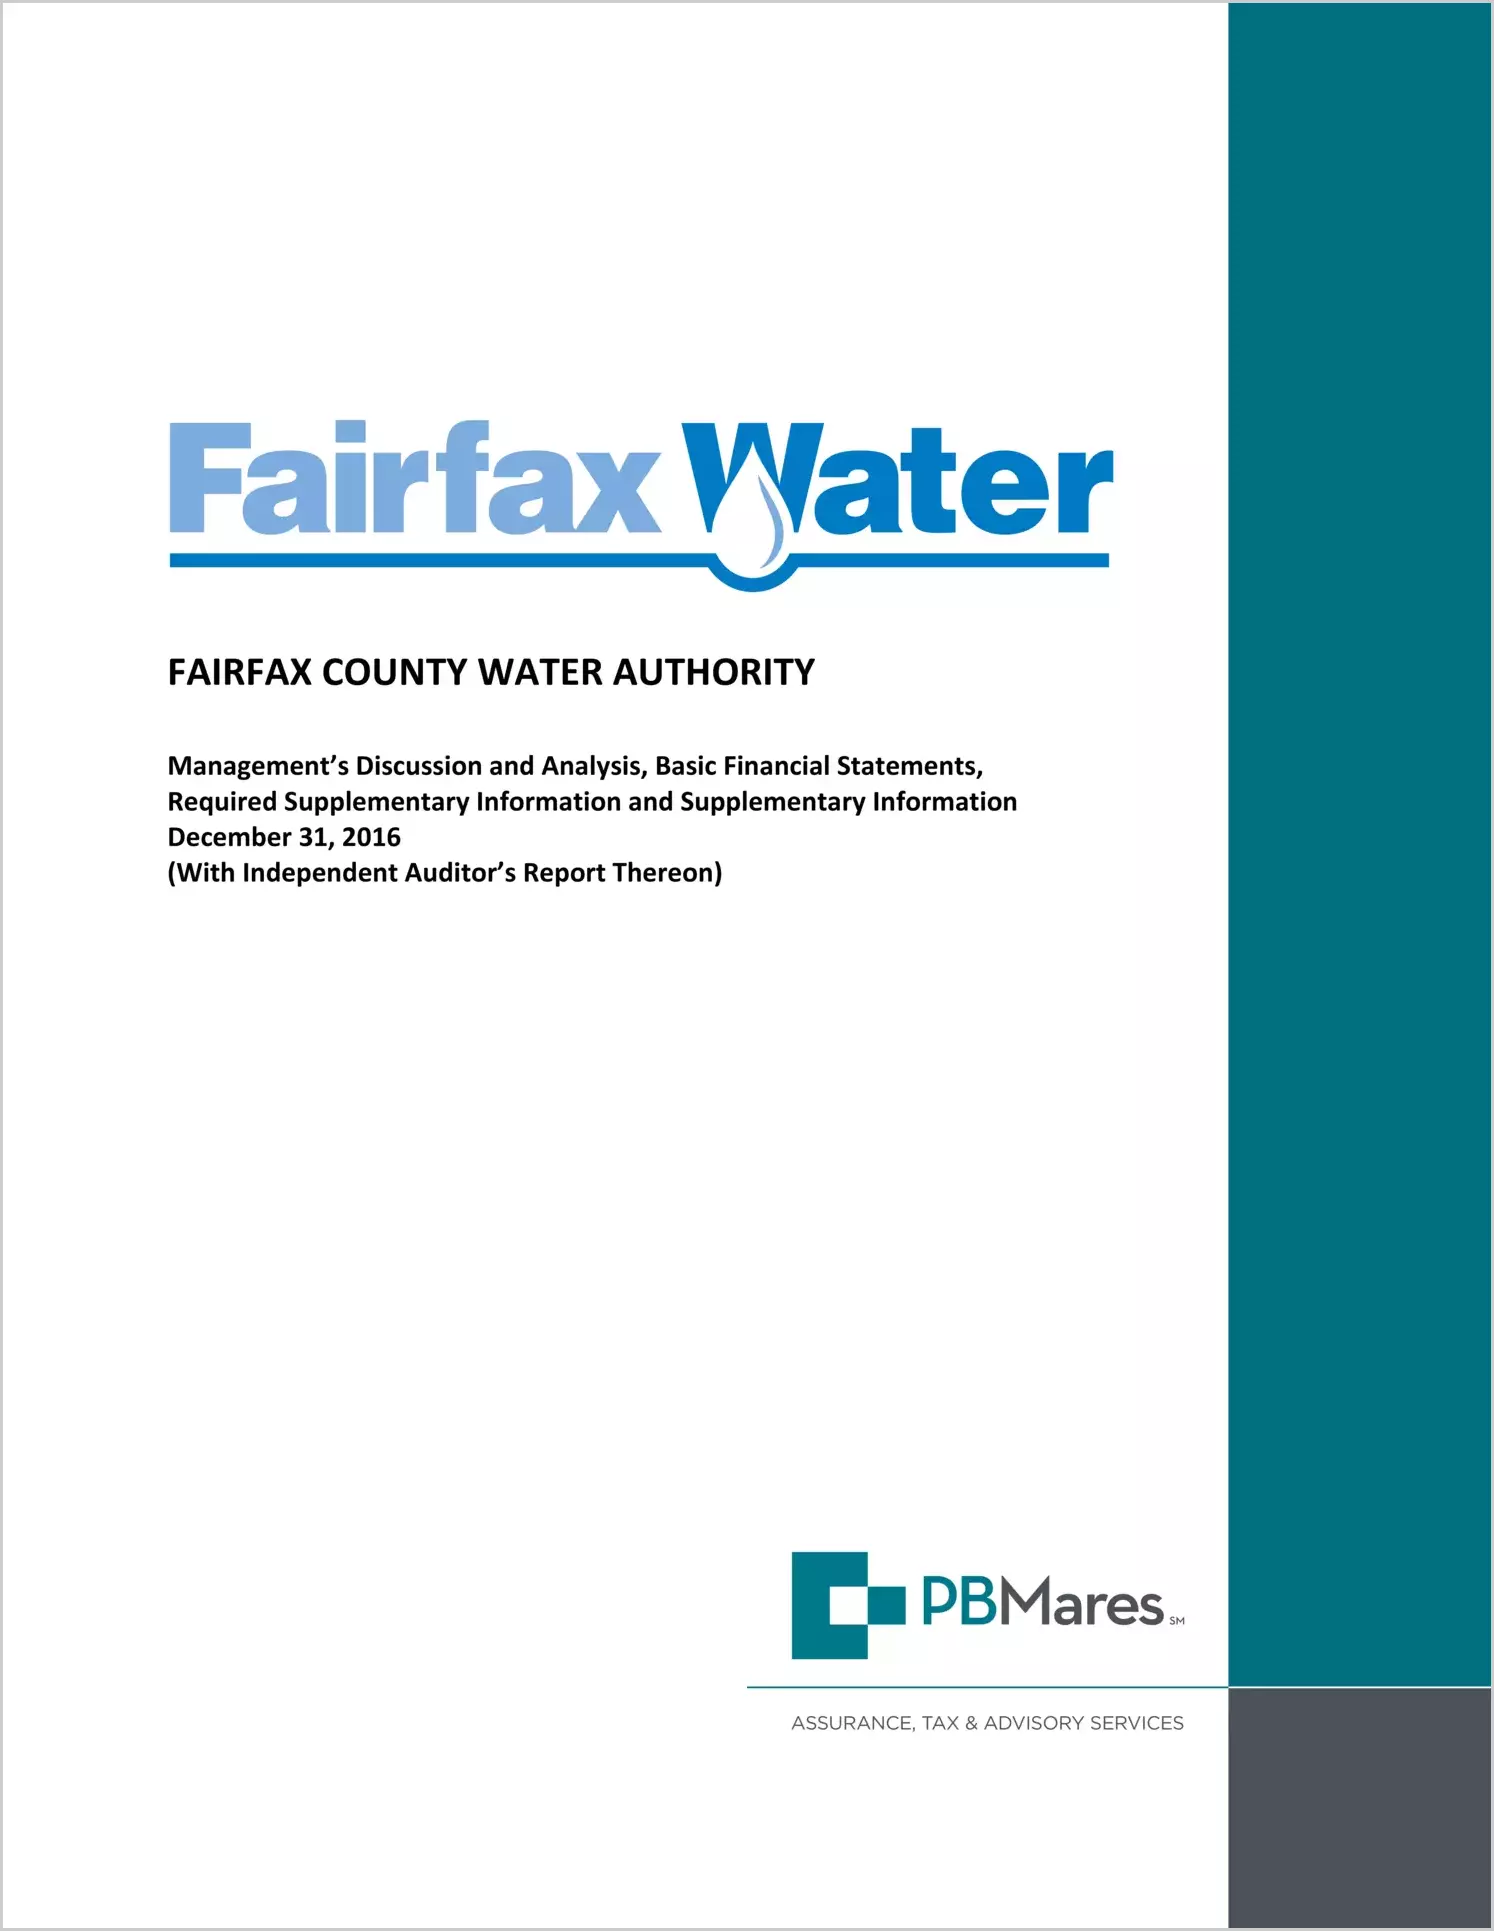 2016 ABC/Other Annual Financial Report  for Fairfax County Water Authority